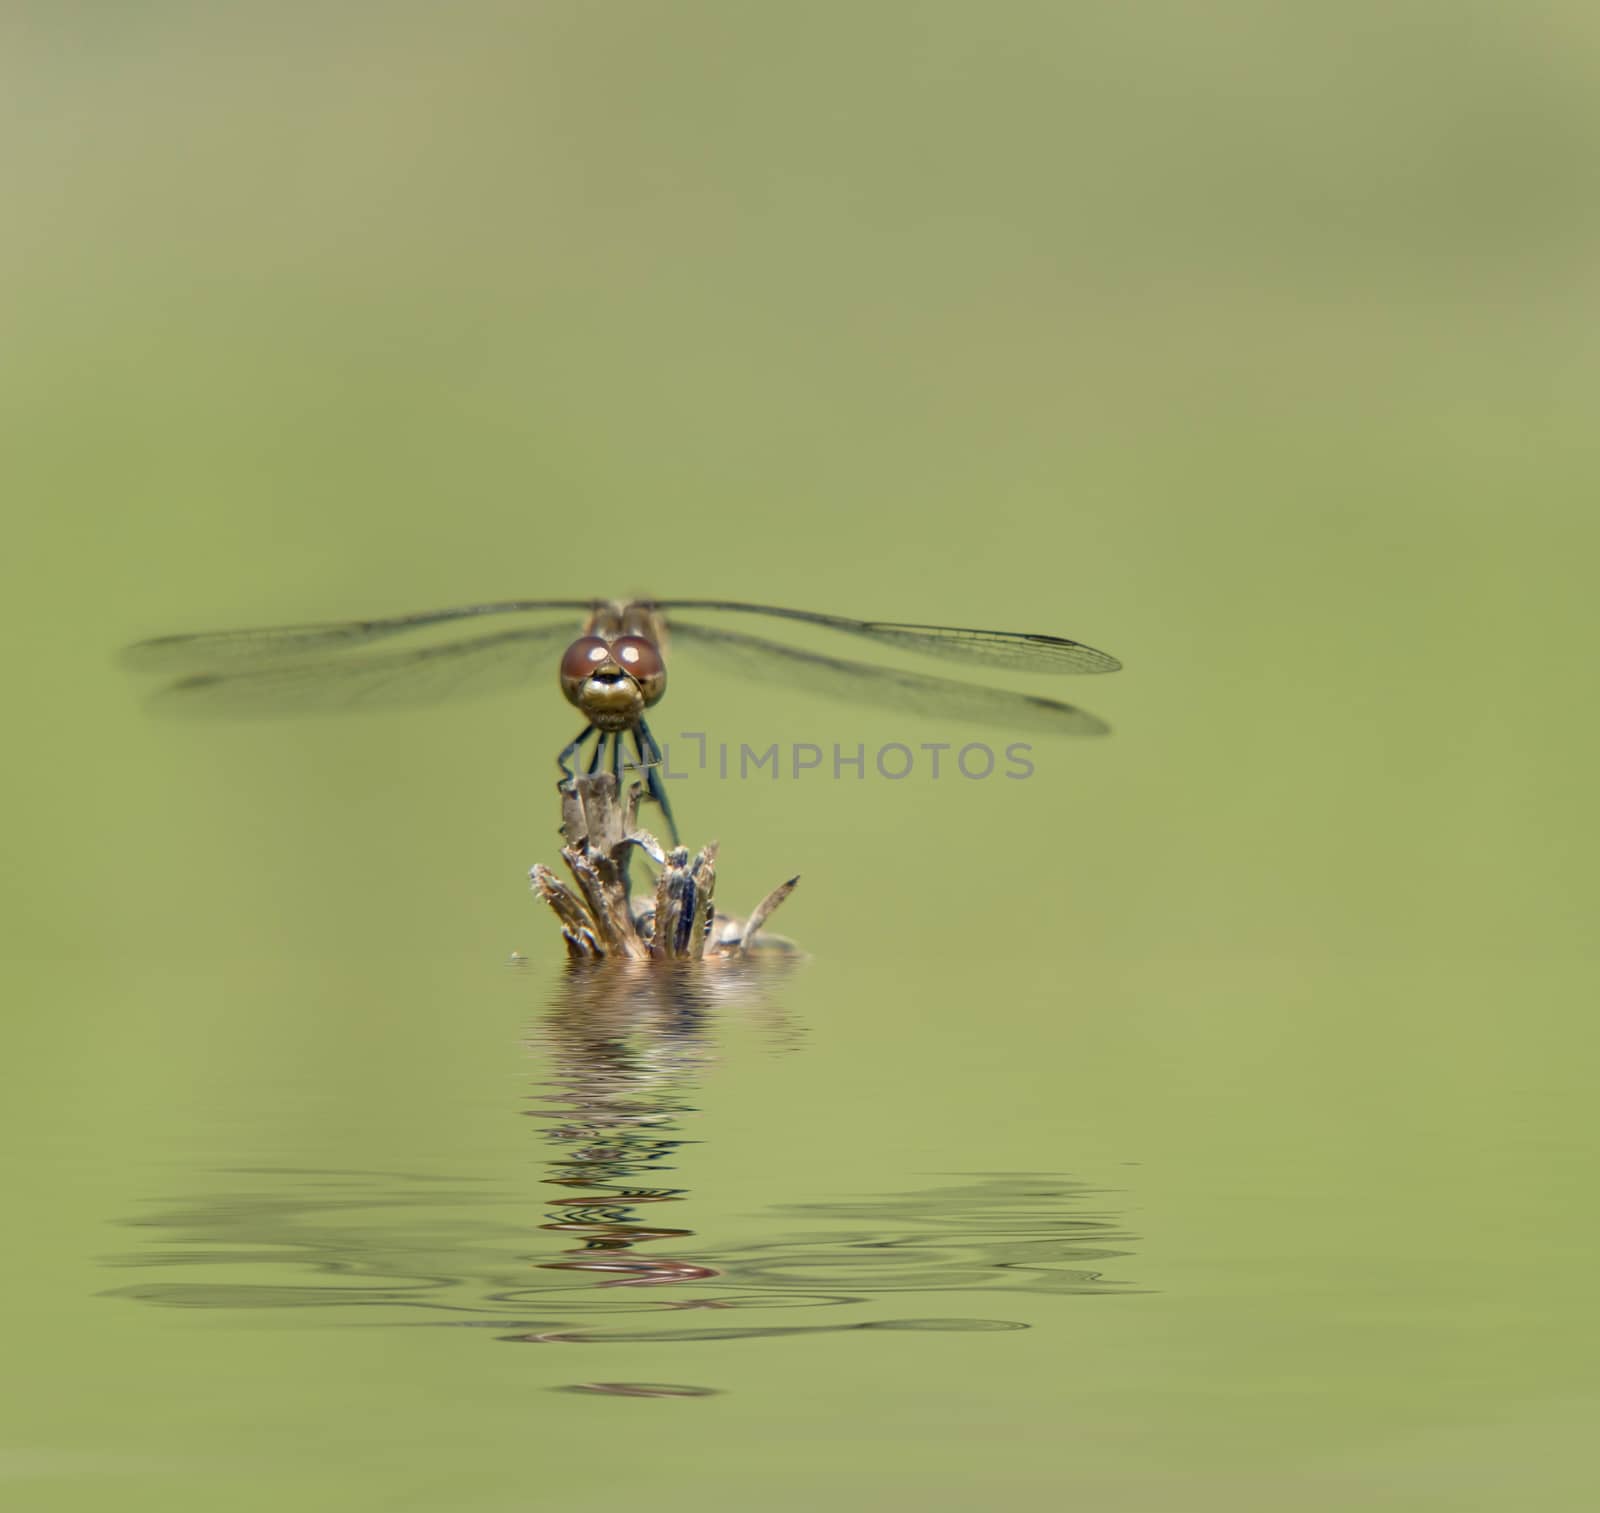 Dragonfly on a dry branch reflected in the water surface with small waves